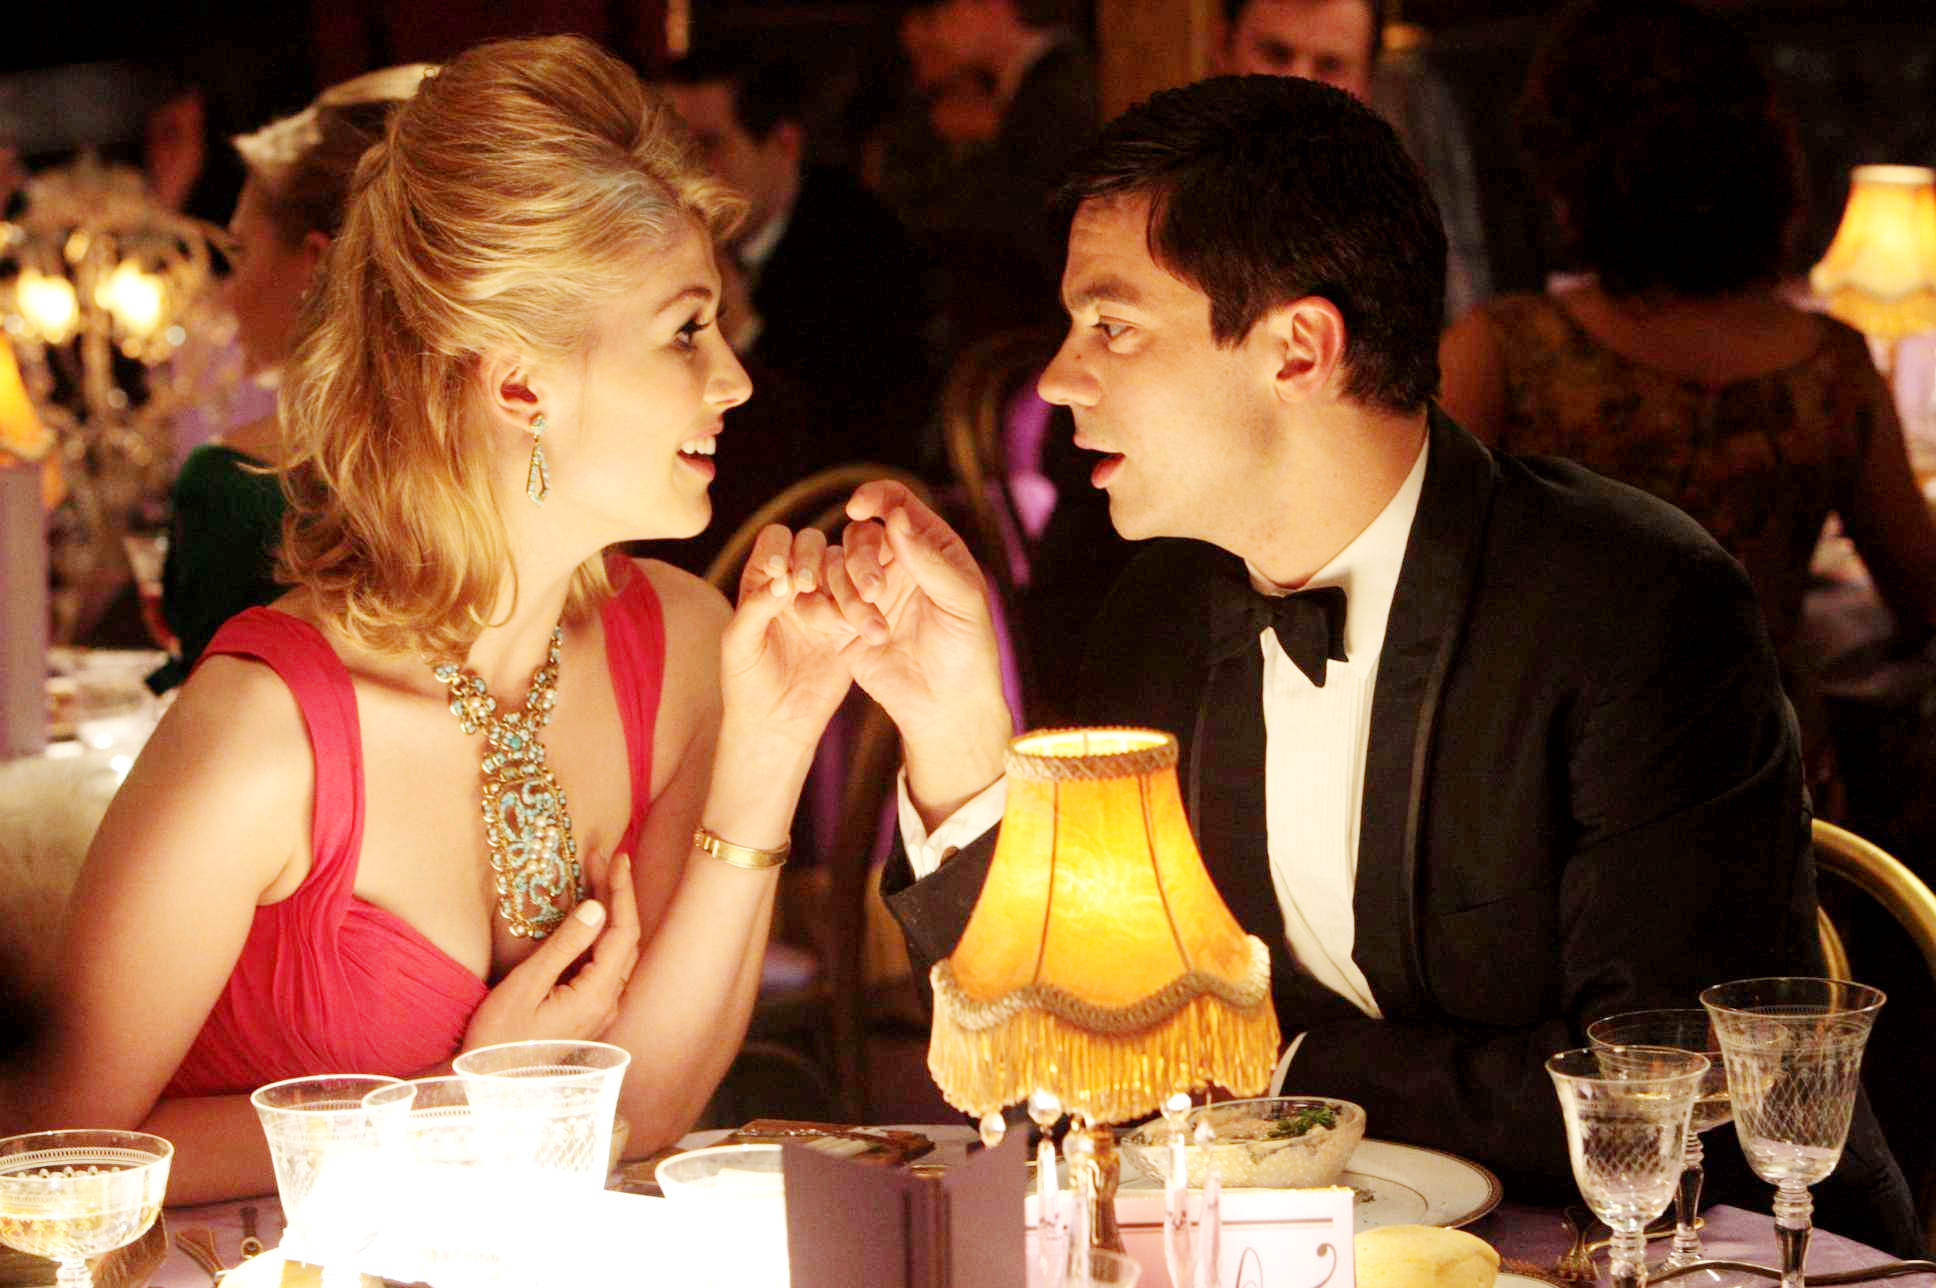 Rosamund Pike stars as Helen and Dominic Cooper stars as Danny in Sony Pictures Classics' An Education (2009). Photo credit by Kerry Brown.